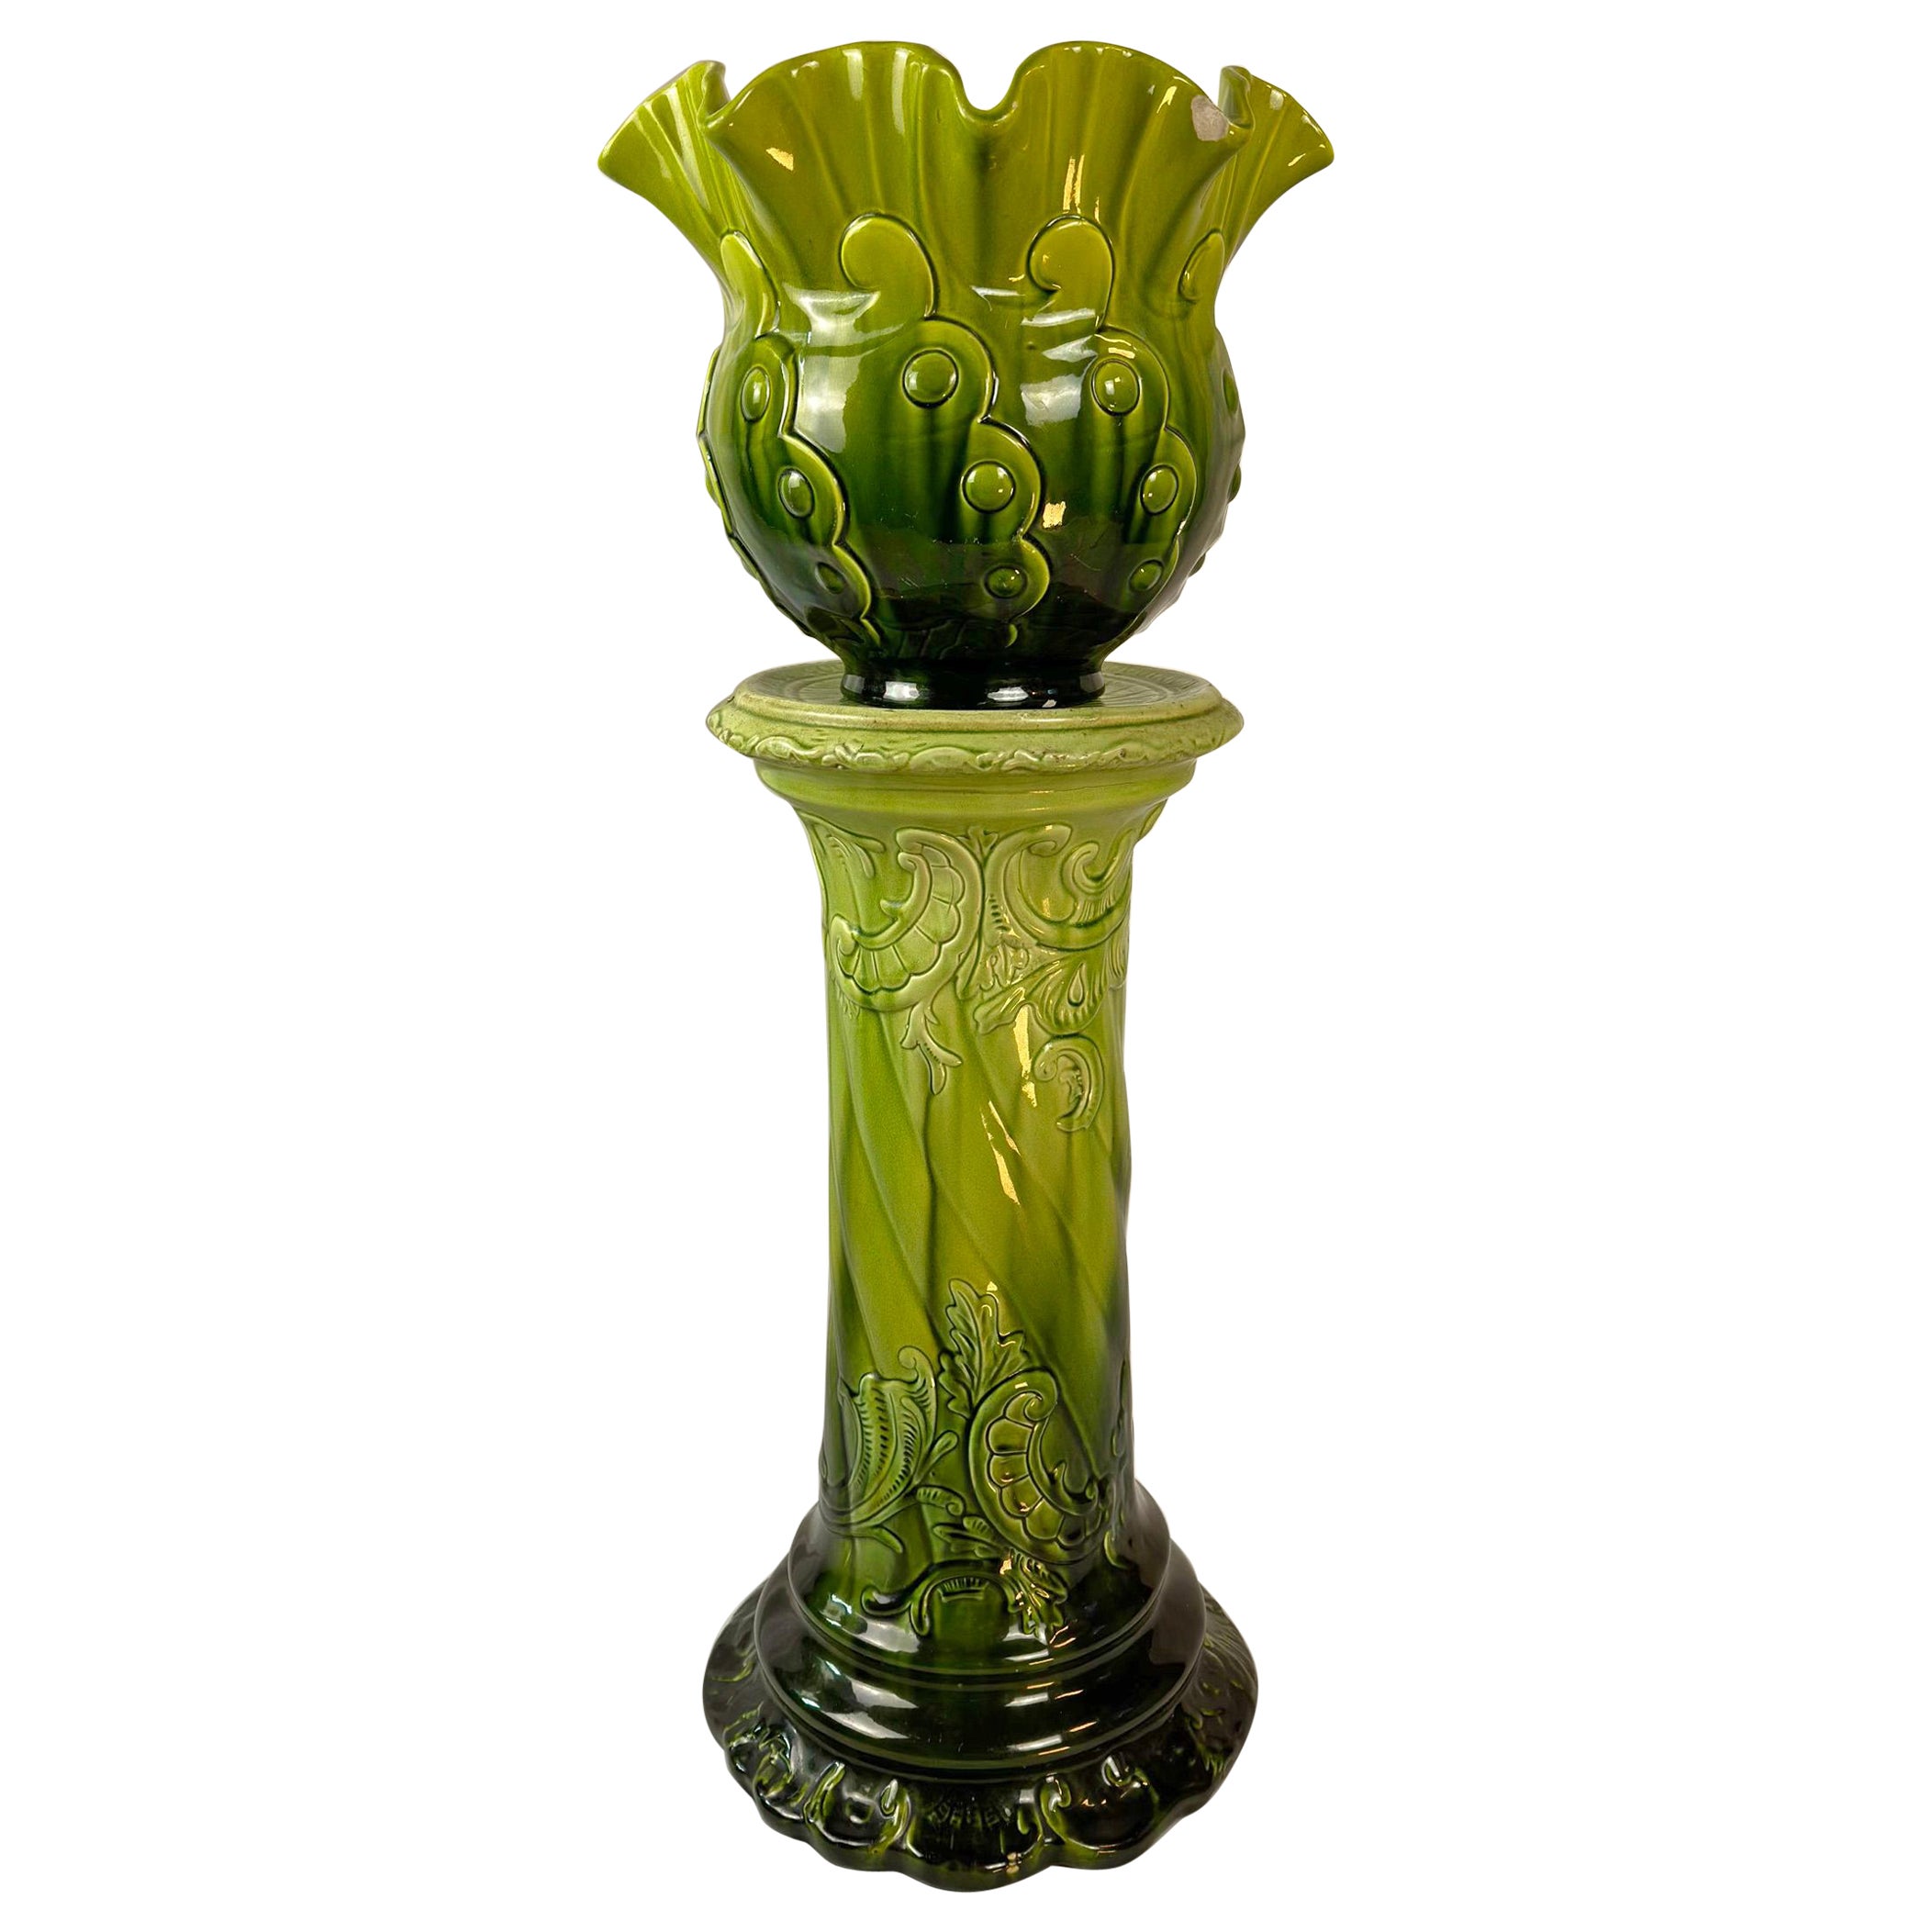 Victorian, Majolica Jardiniere - Green Pottery Planter and Pedestal by Bretby For Sale